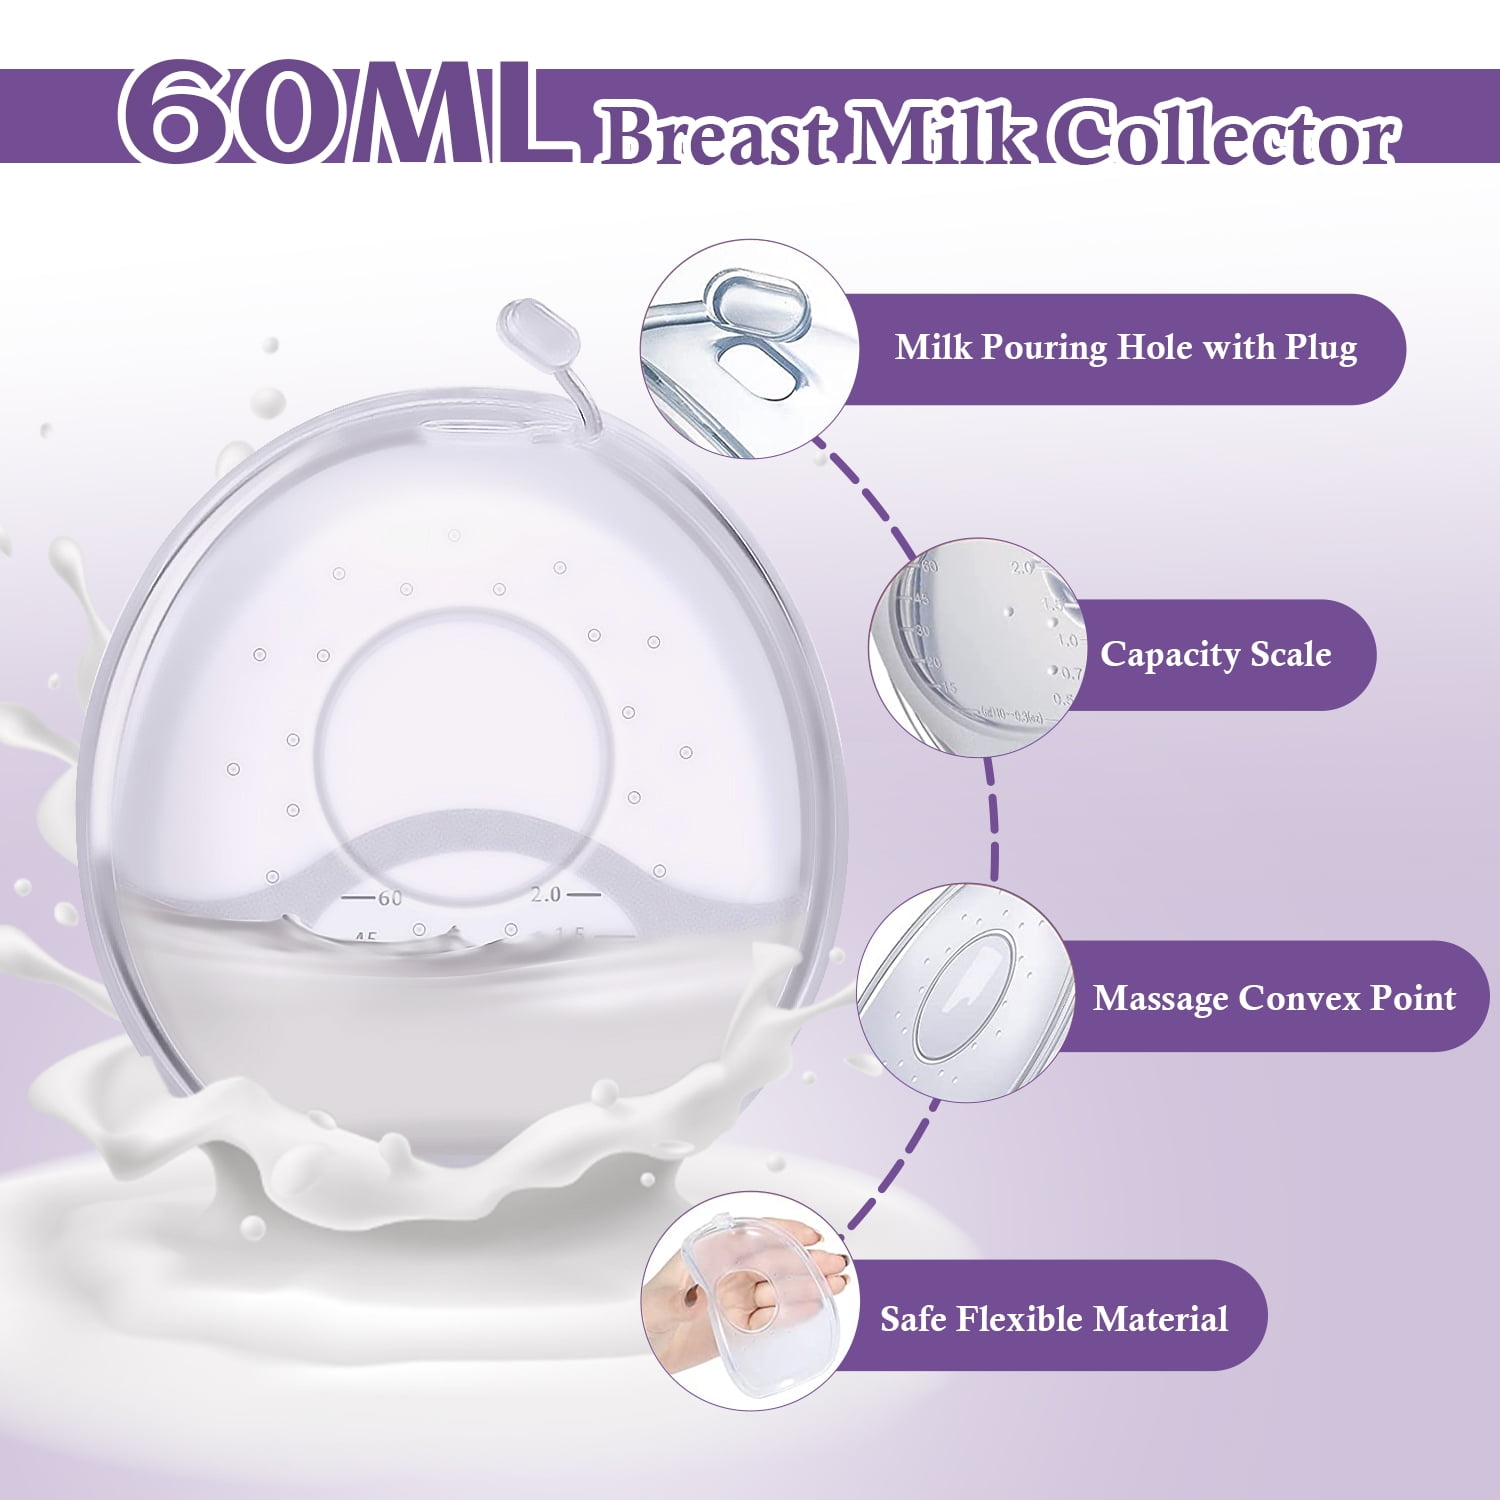 Breast Milk Catcher for Breastfeeding with Pumping Function︱4 oz Capacity  Milk Saver︱Breast Shells Milk Collector︱Kick-Proof, Soft, Light︱Hands-Free